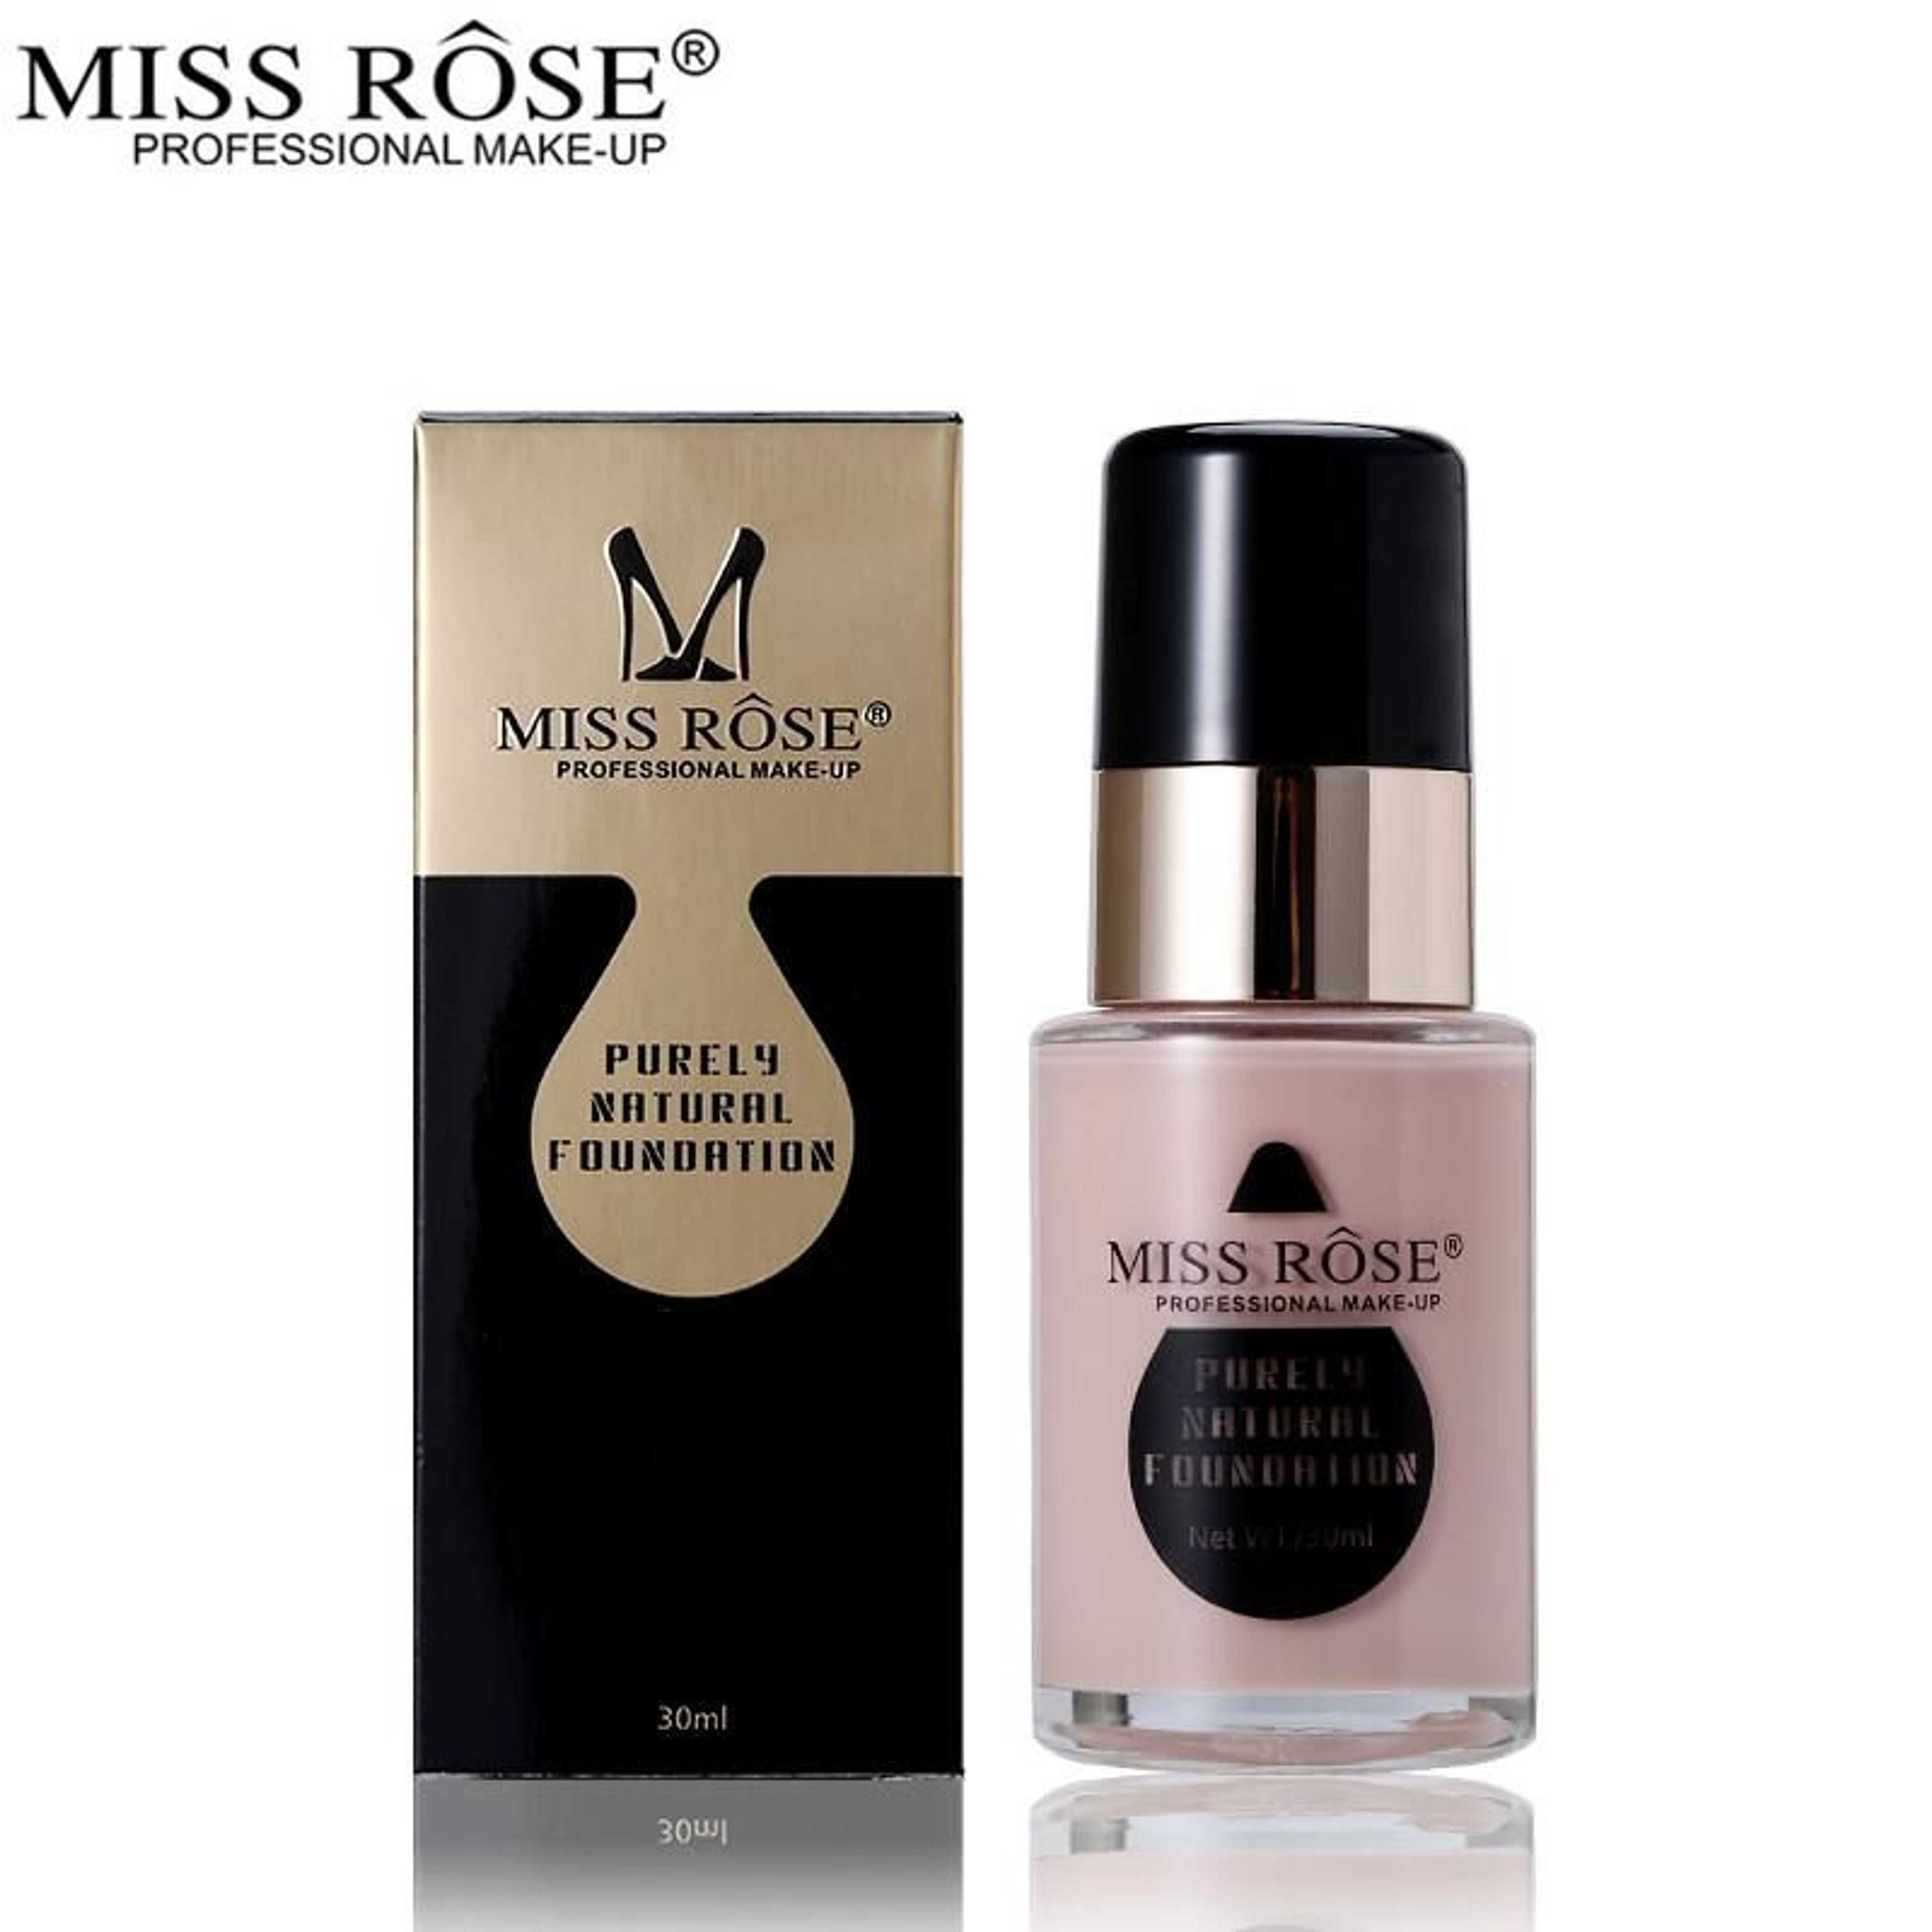 Miss Rose Purely Natural Foundation Makeup